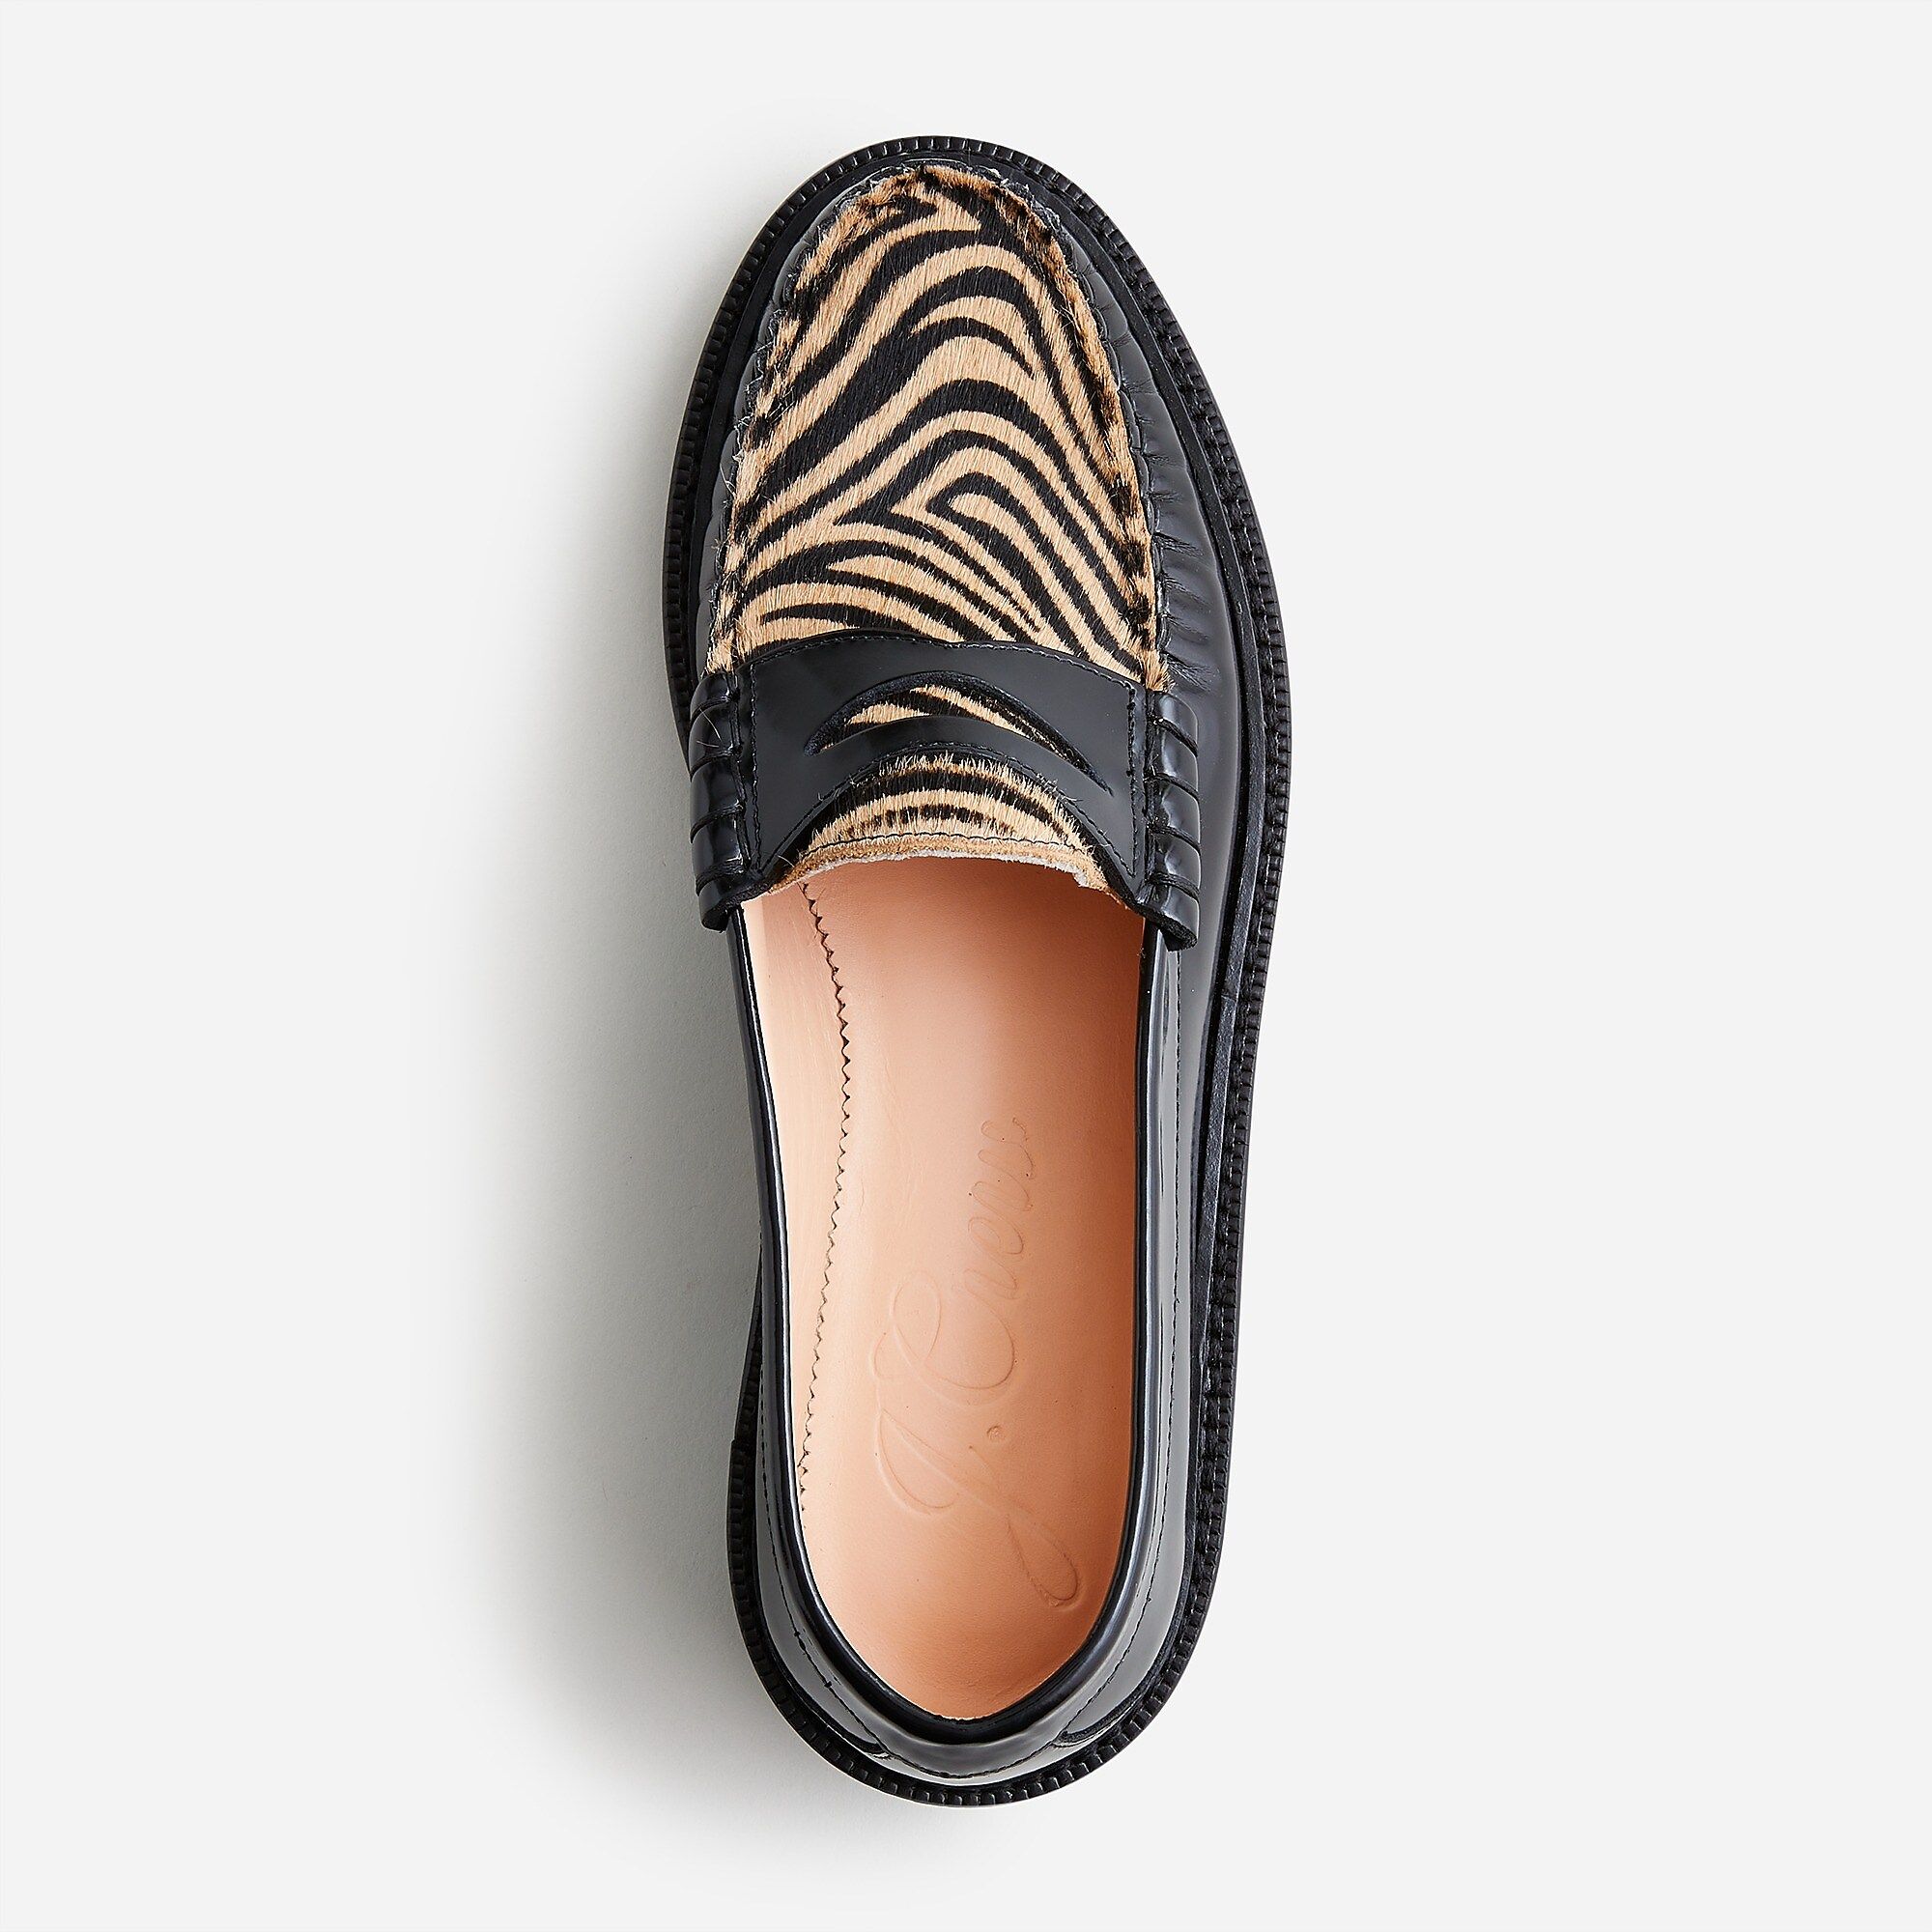 J.Crew: Rowan Penny Loafers In Leather And Calf Hair For Women | J.Crew US